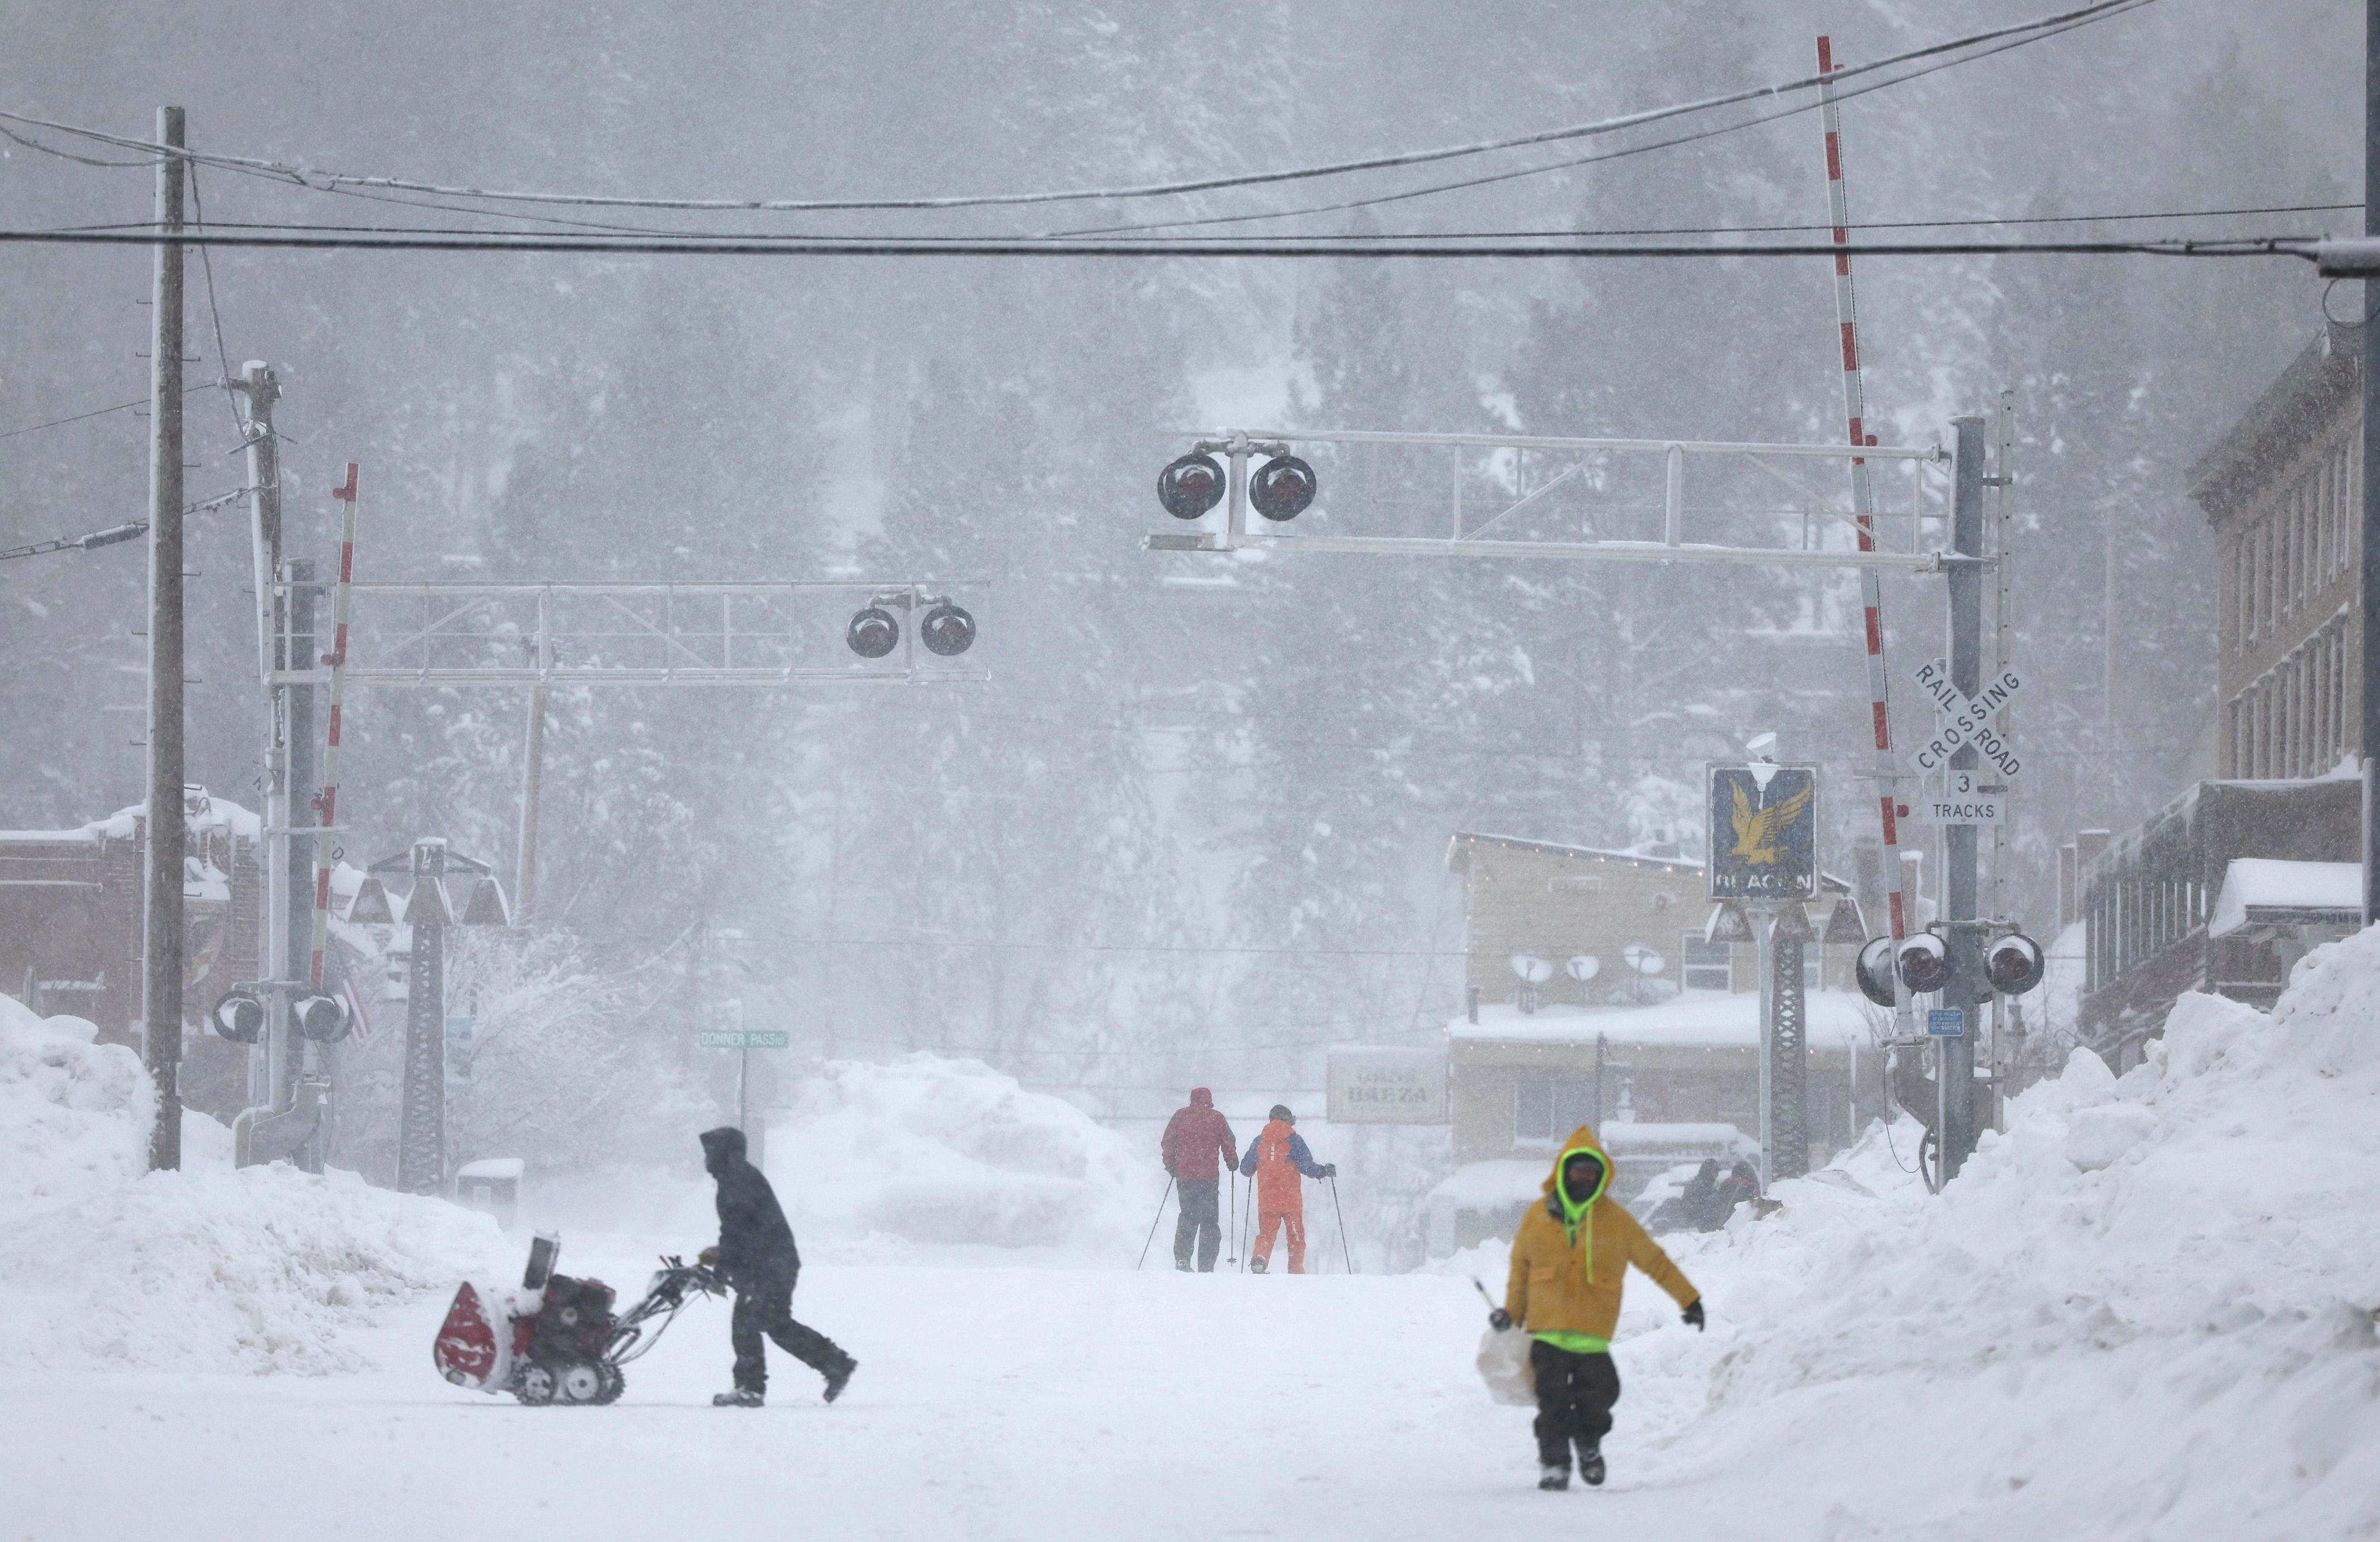 how much snow fell in northern california and the sierra nevada? snowfall over 7 feet